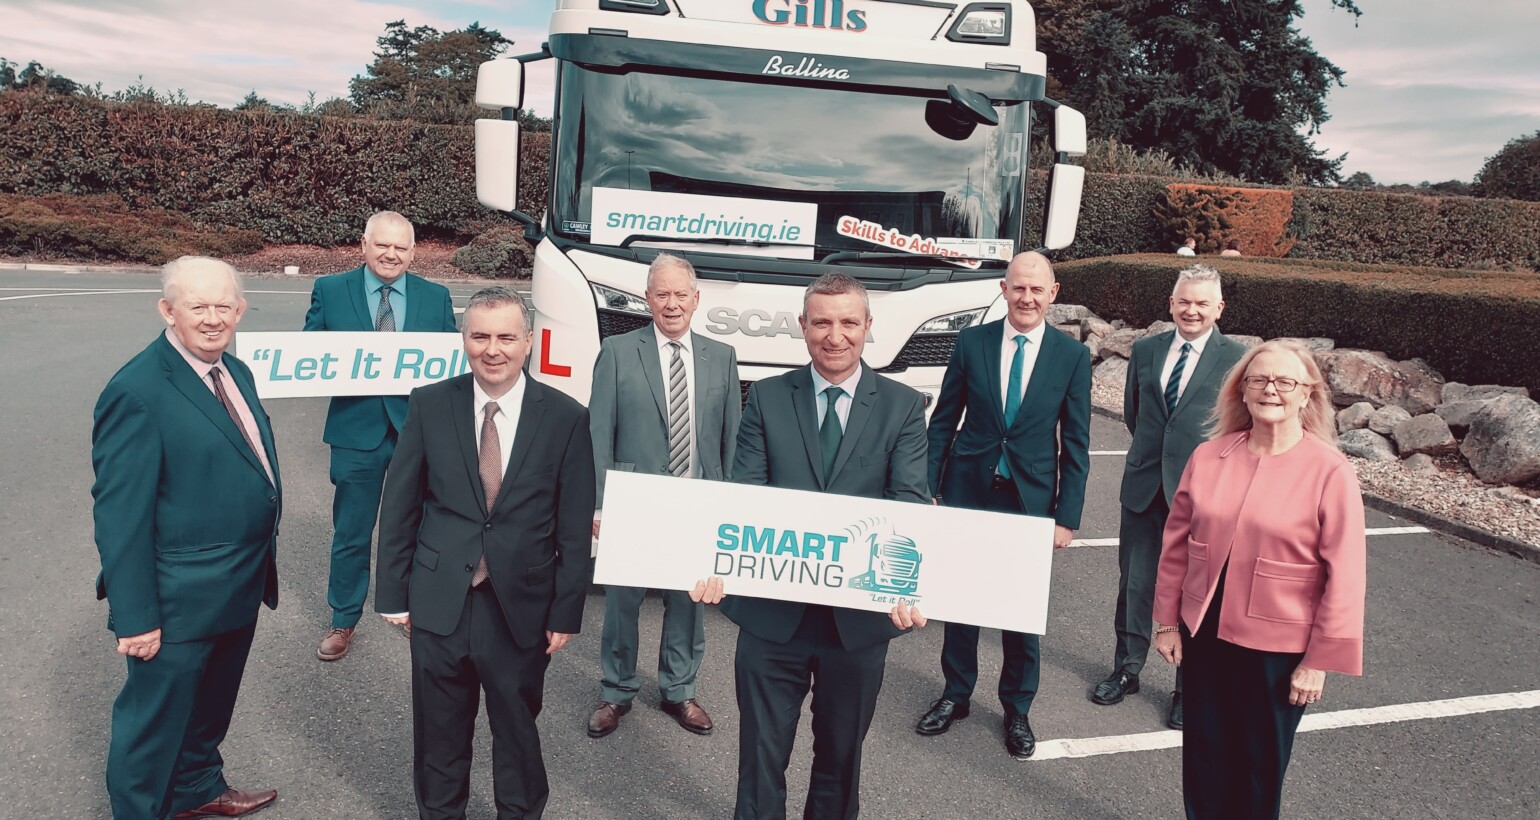 Minister of State Niall Collins TD launches a new innovative Eco Driving programme for professional HGV drivers